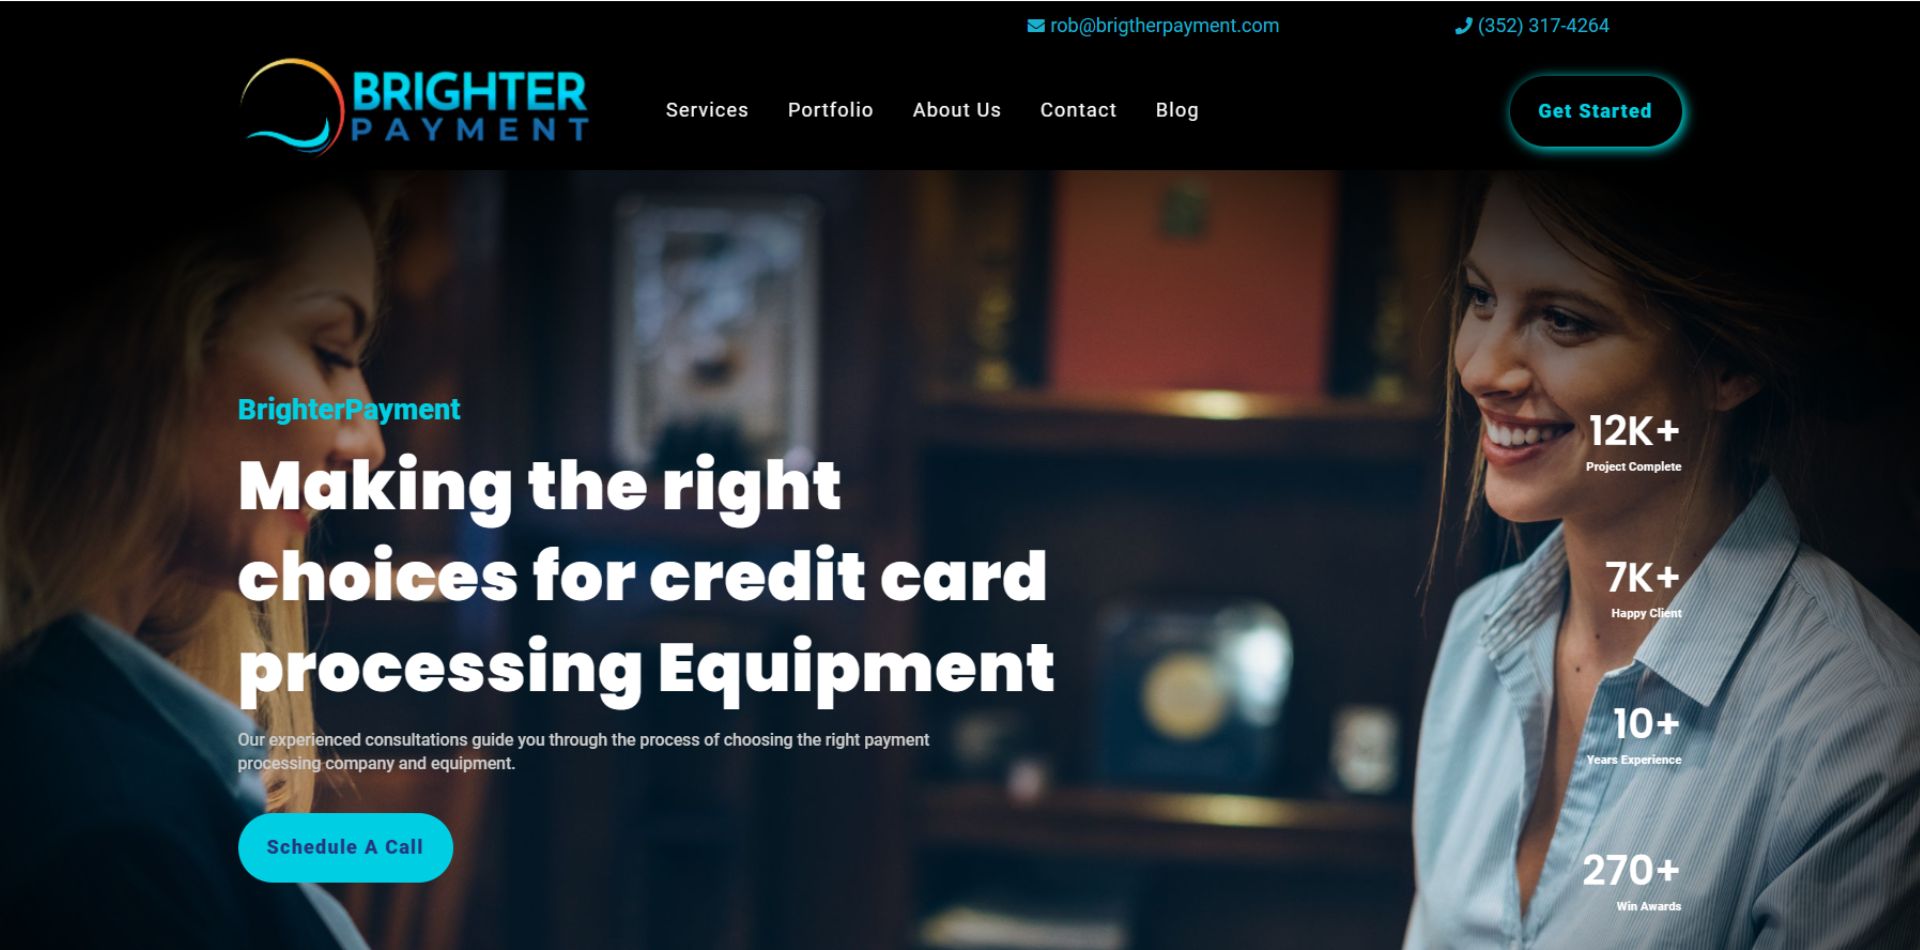 Brighter Payment Website